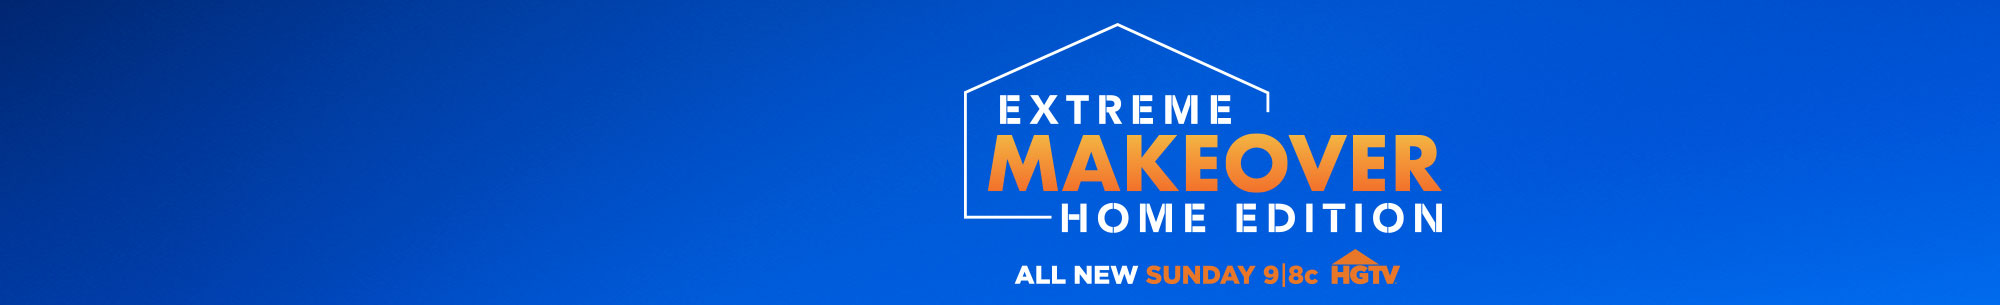 Extreme Makeover: Home Edition - Best Buy